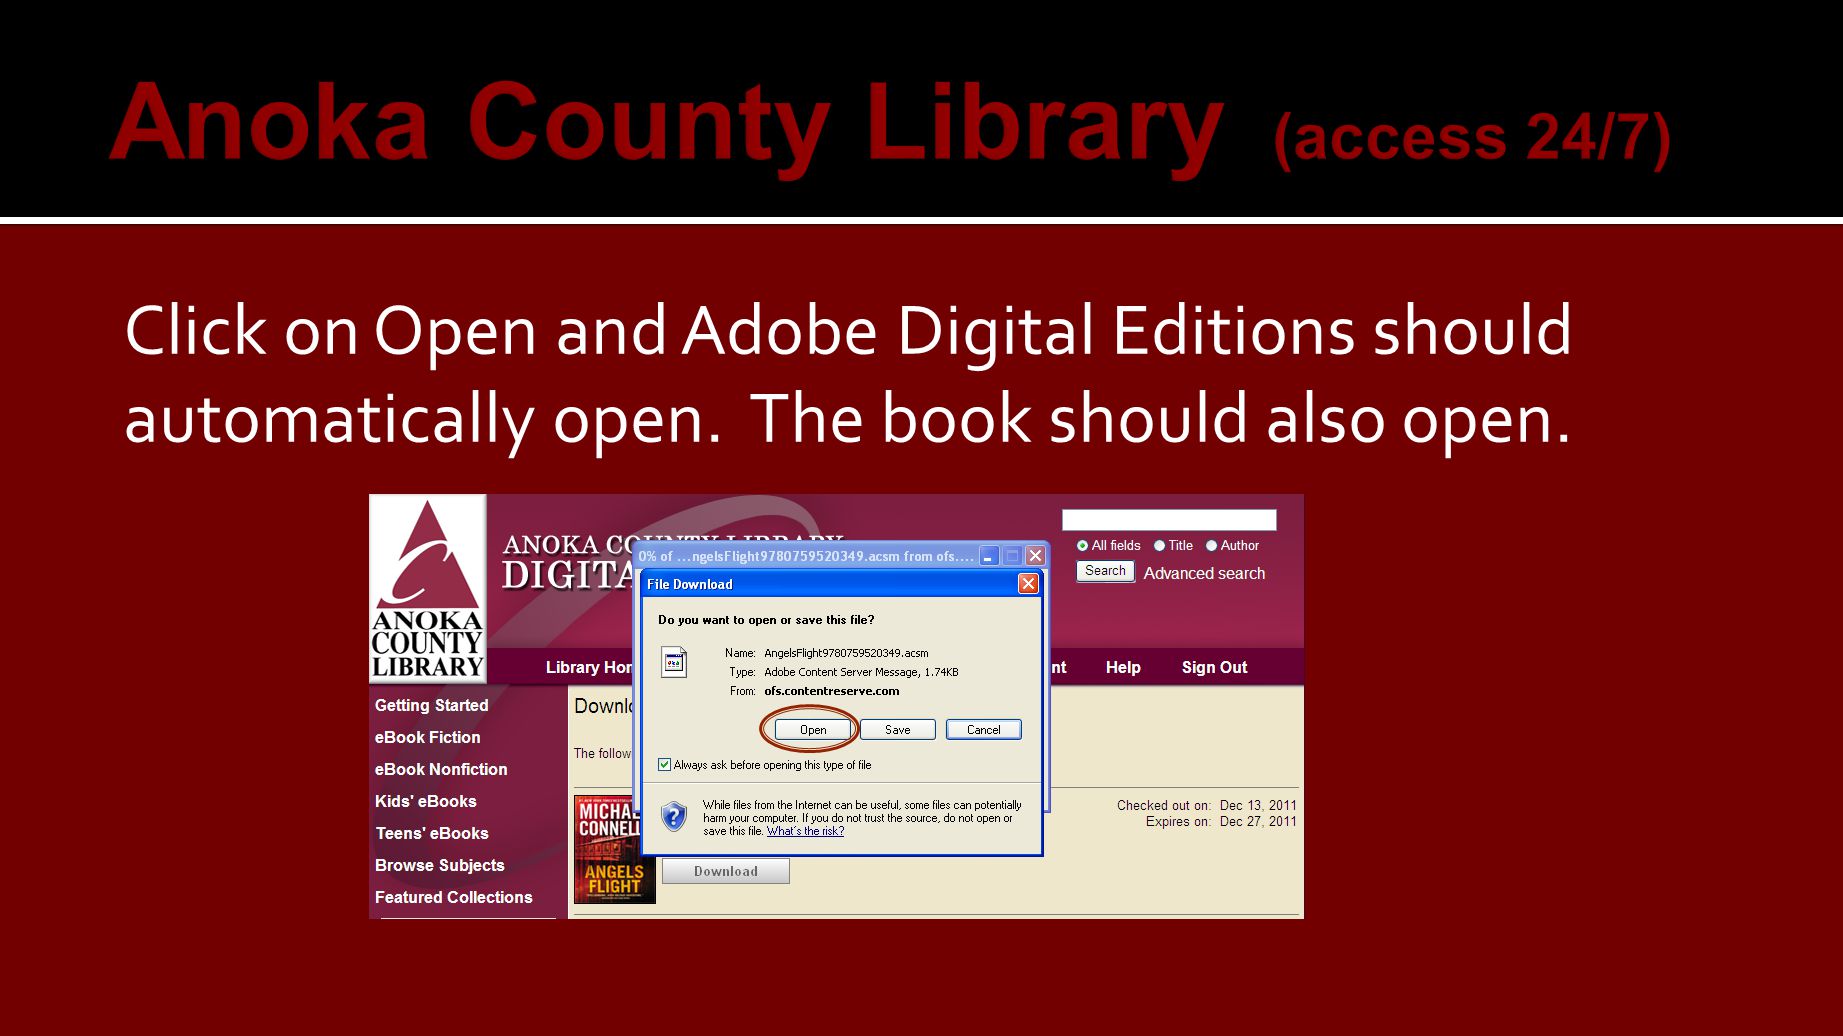 Click on Open and Adobe Digital Editions should automatically open. The book should also open.